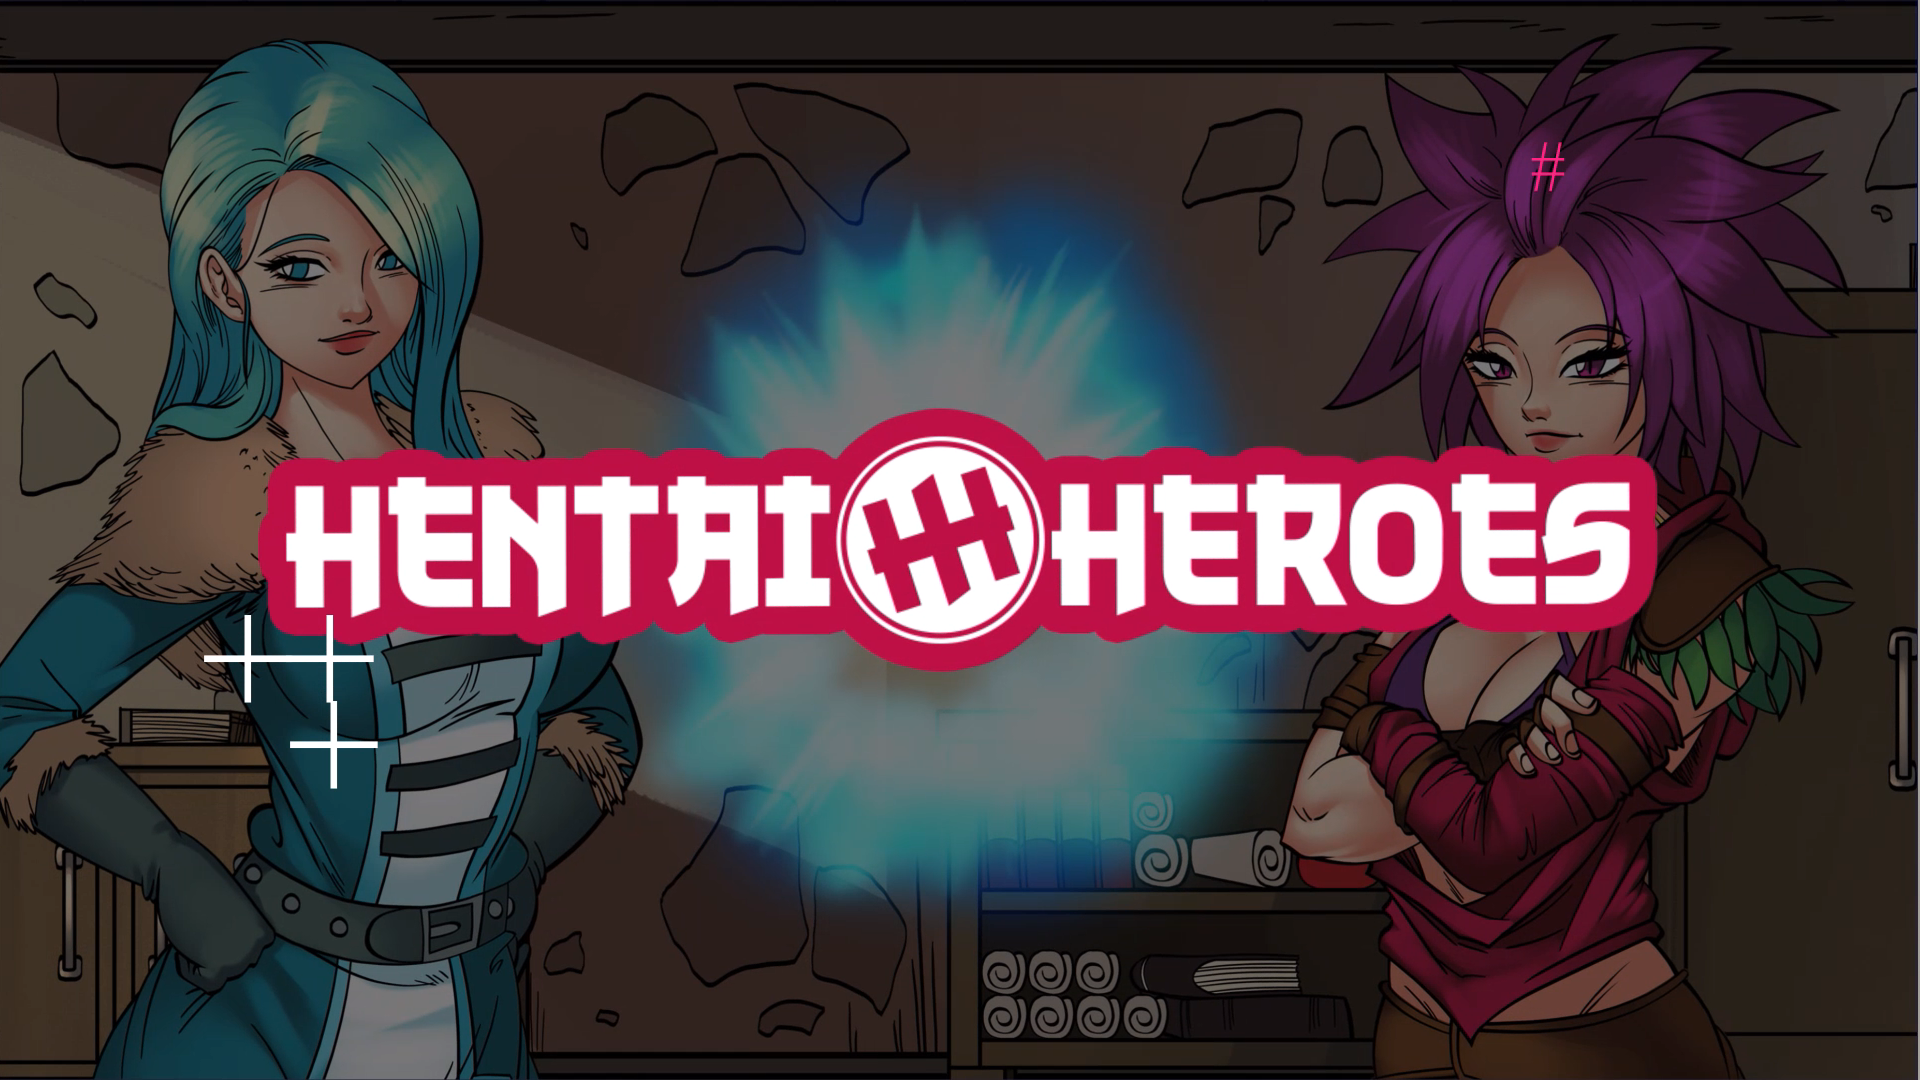 This commmission is proudly presented by our friends from Hentai Heroes. 